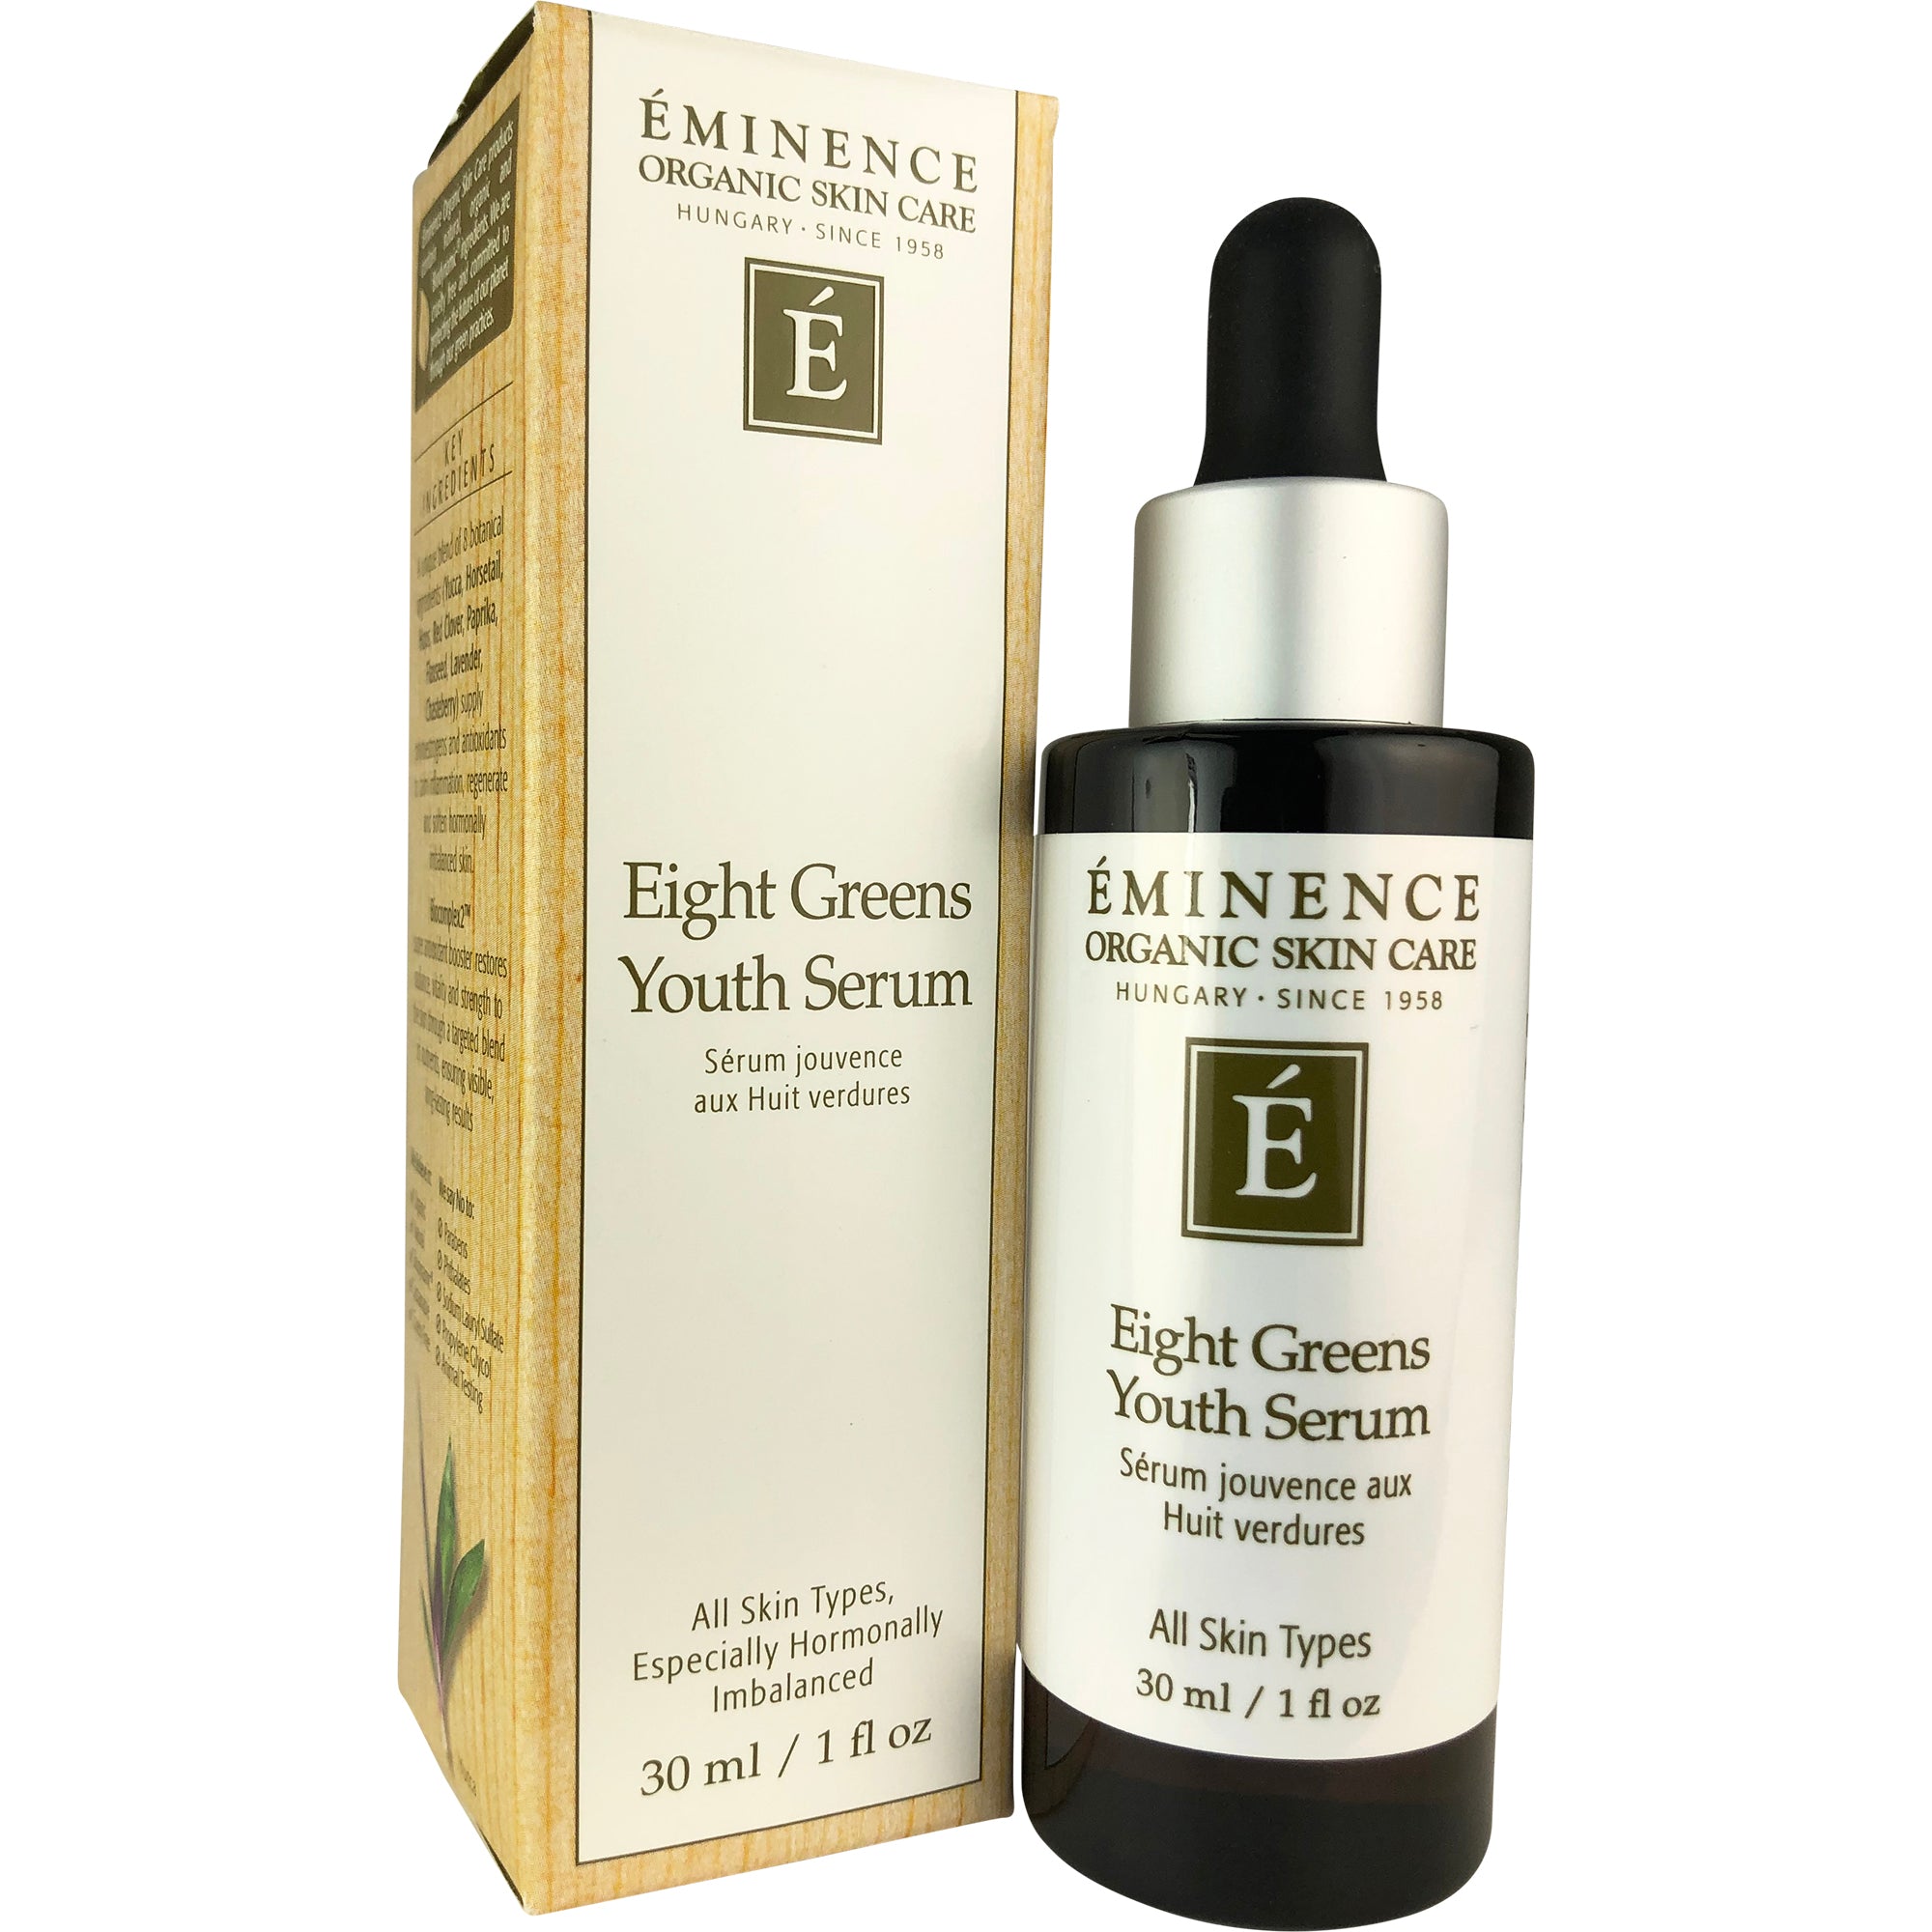 Eminence Organic Skin Care Eight Greens Youth Serum For All Skin Types Especially Hormonally Imbalanced 1 oz